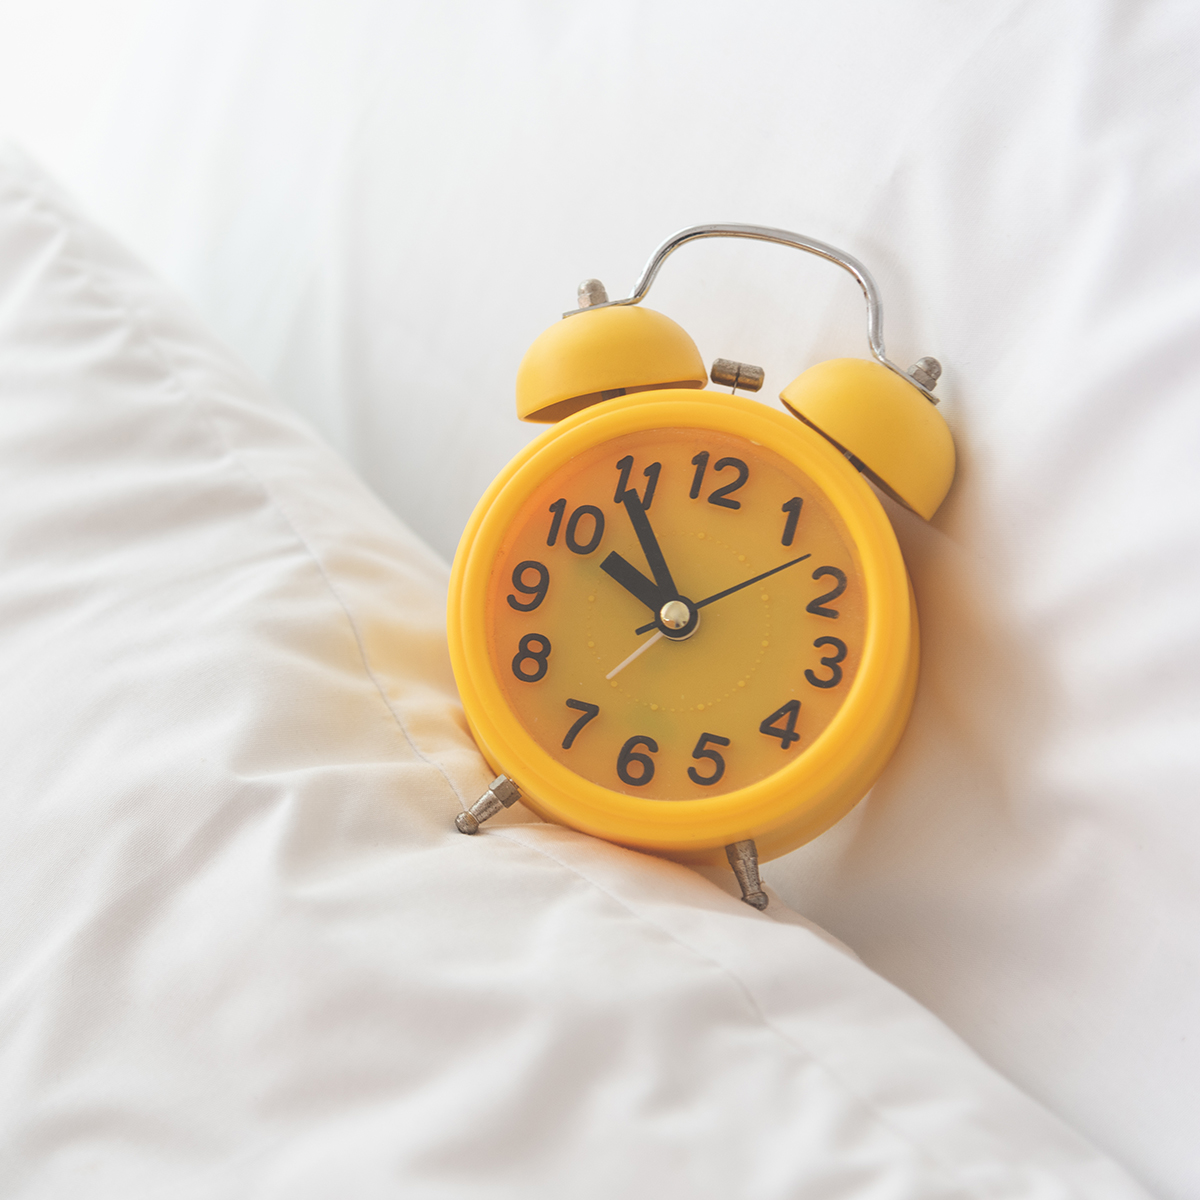 Yellow alarm clock on white bed background. Travel and Vacation concept. Home object accessories theme.